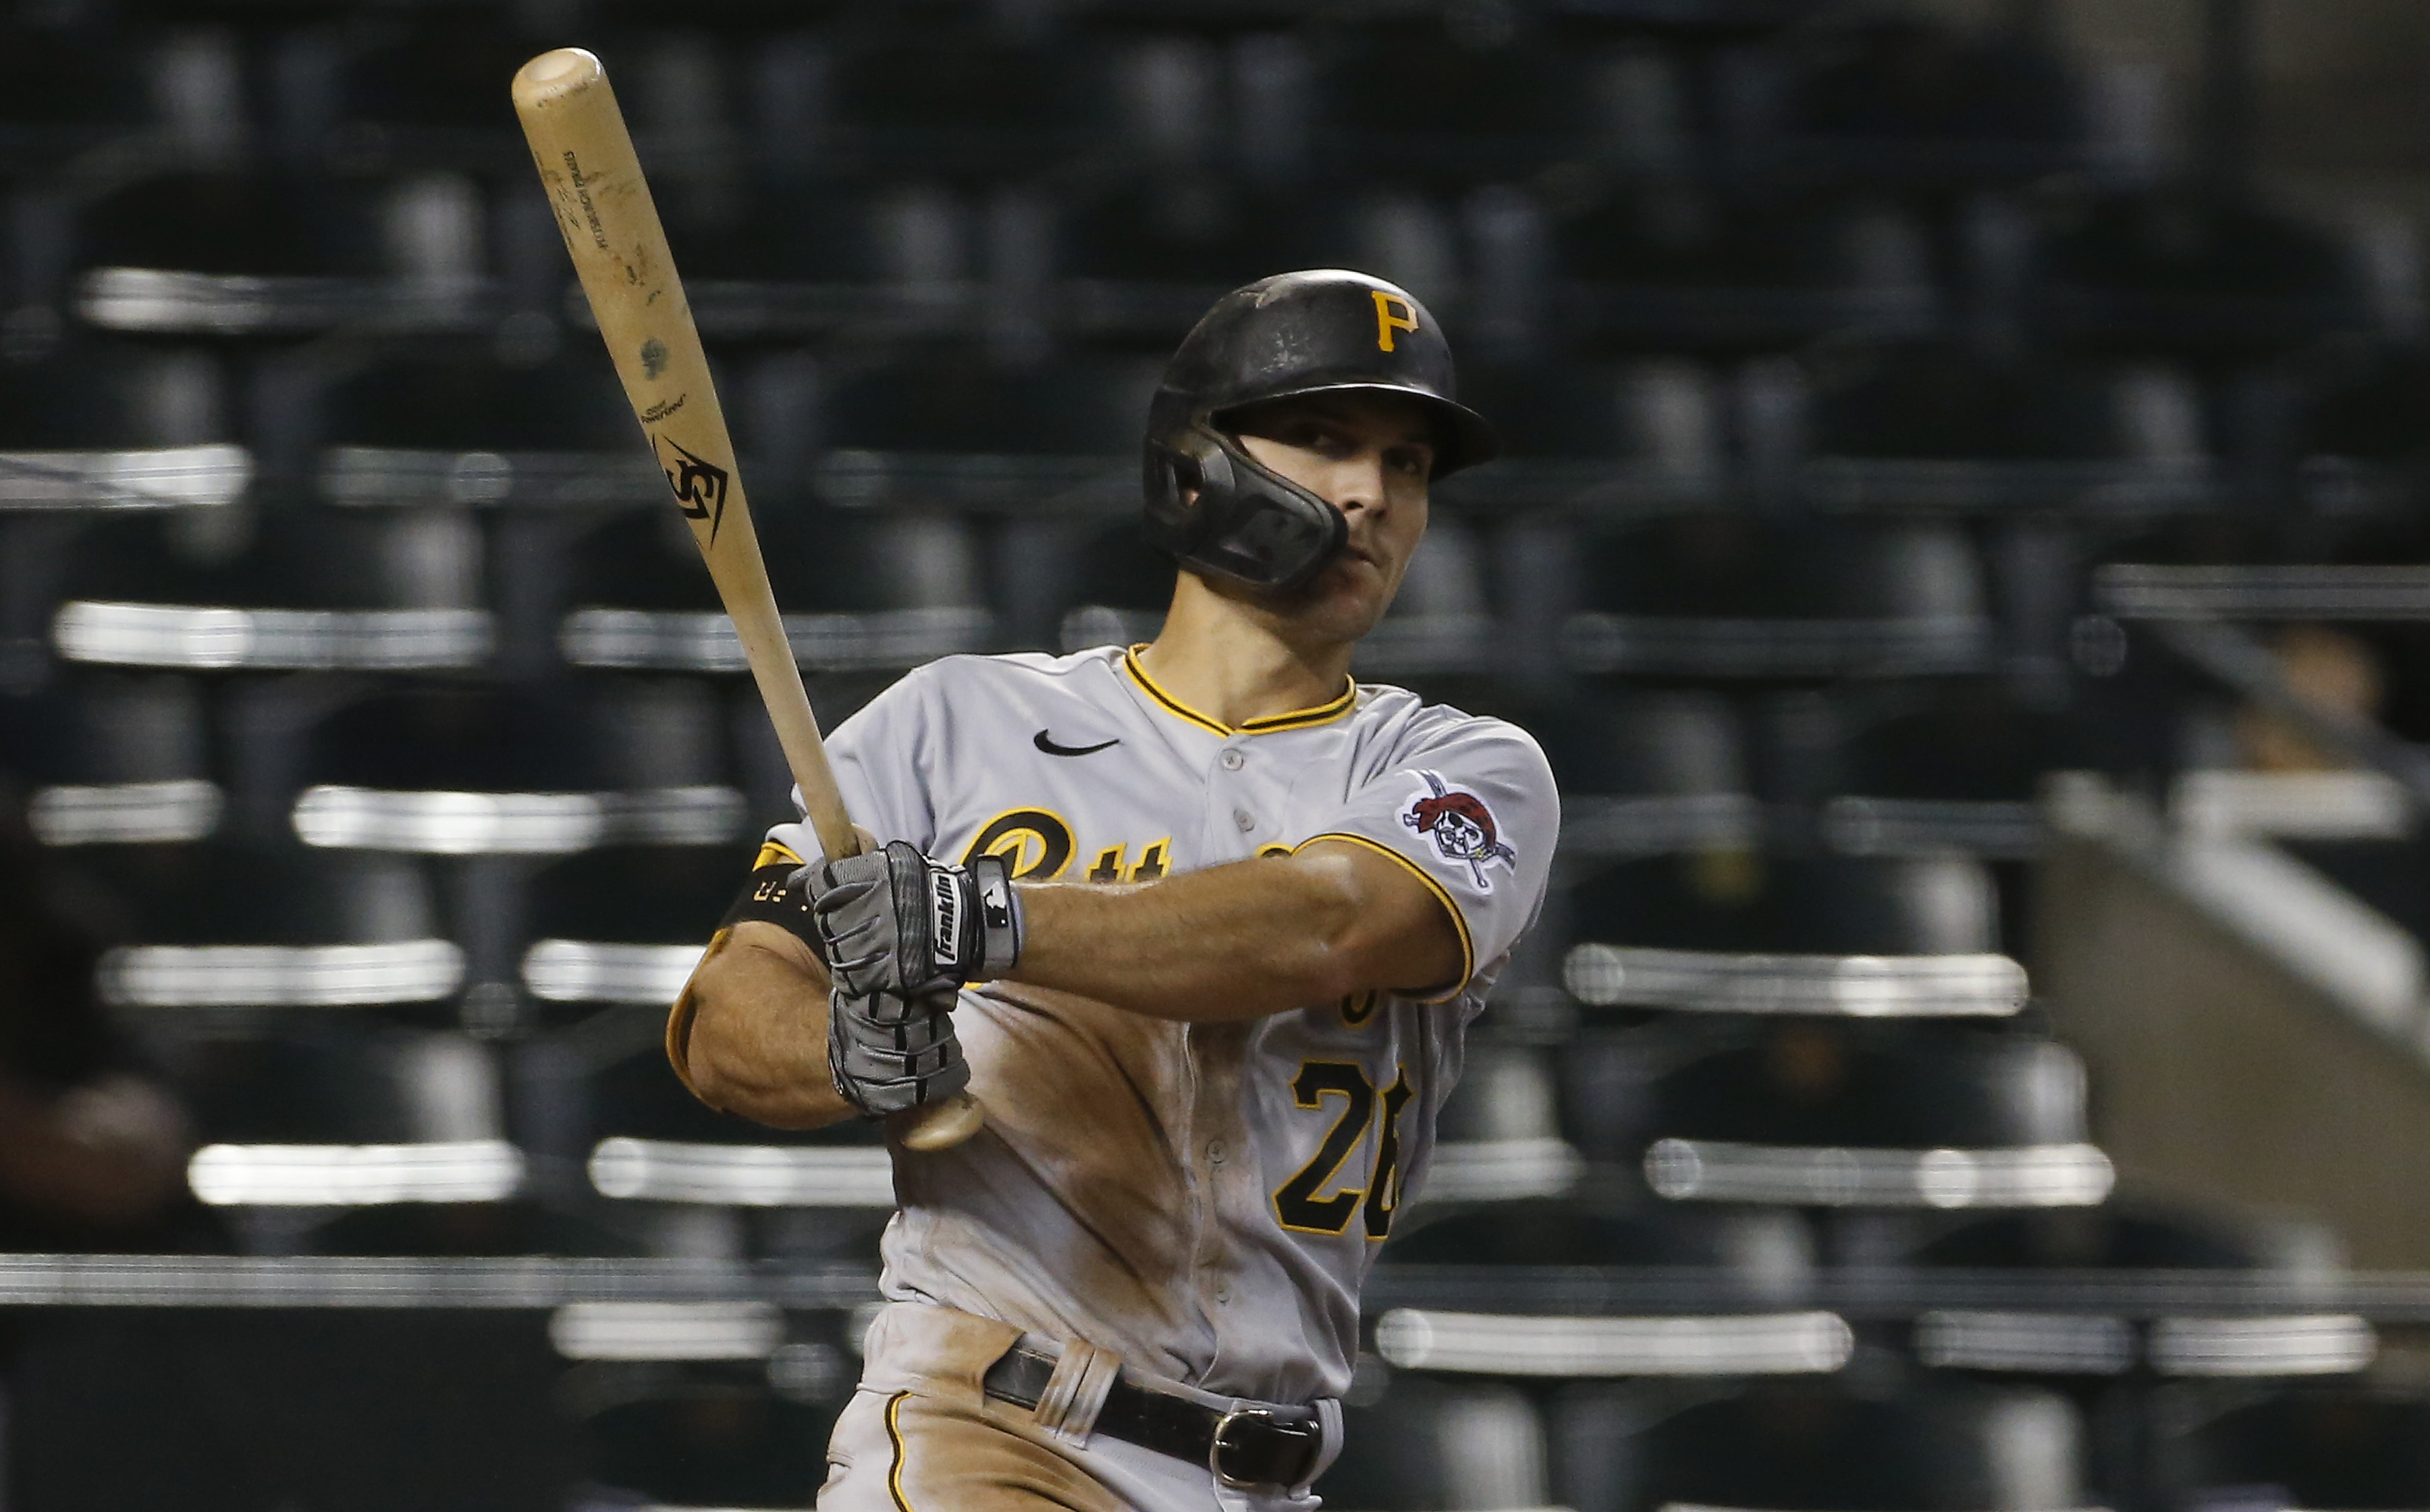 Pirates' Adam Frazier wants to improve at plate after playing